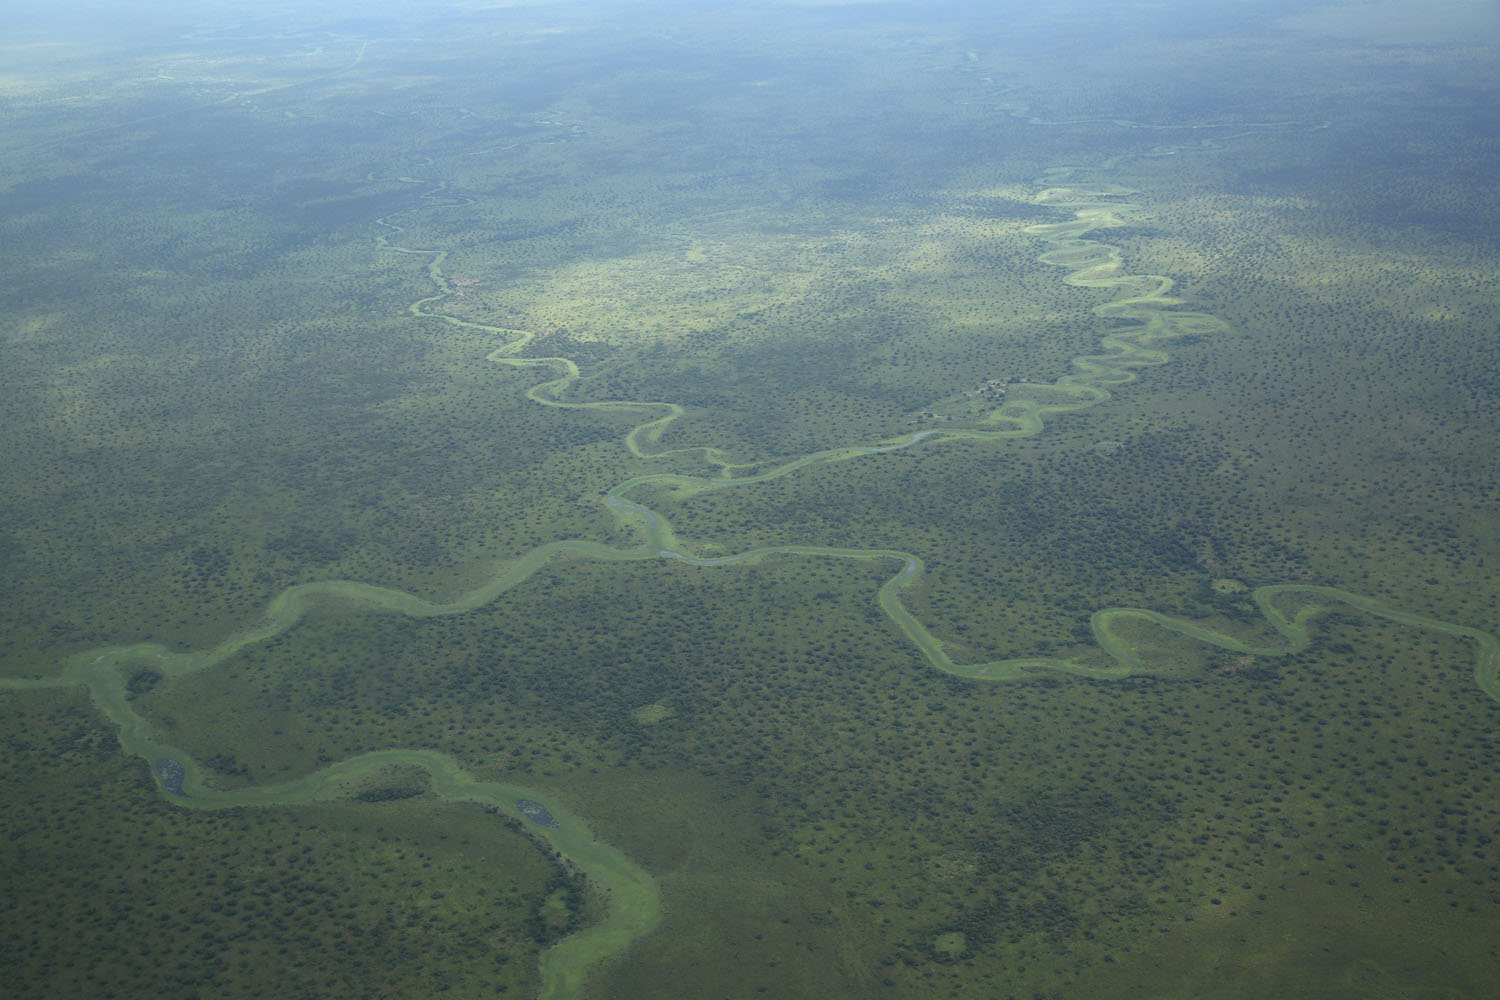 A view of Abyei state from a plane